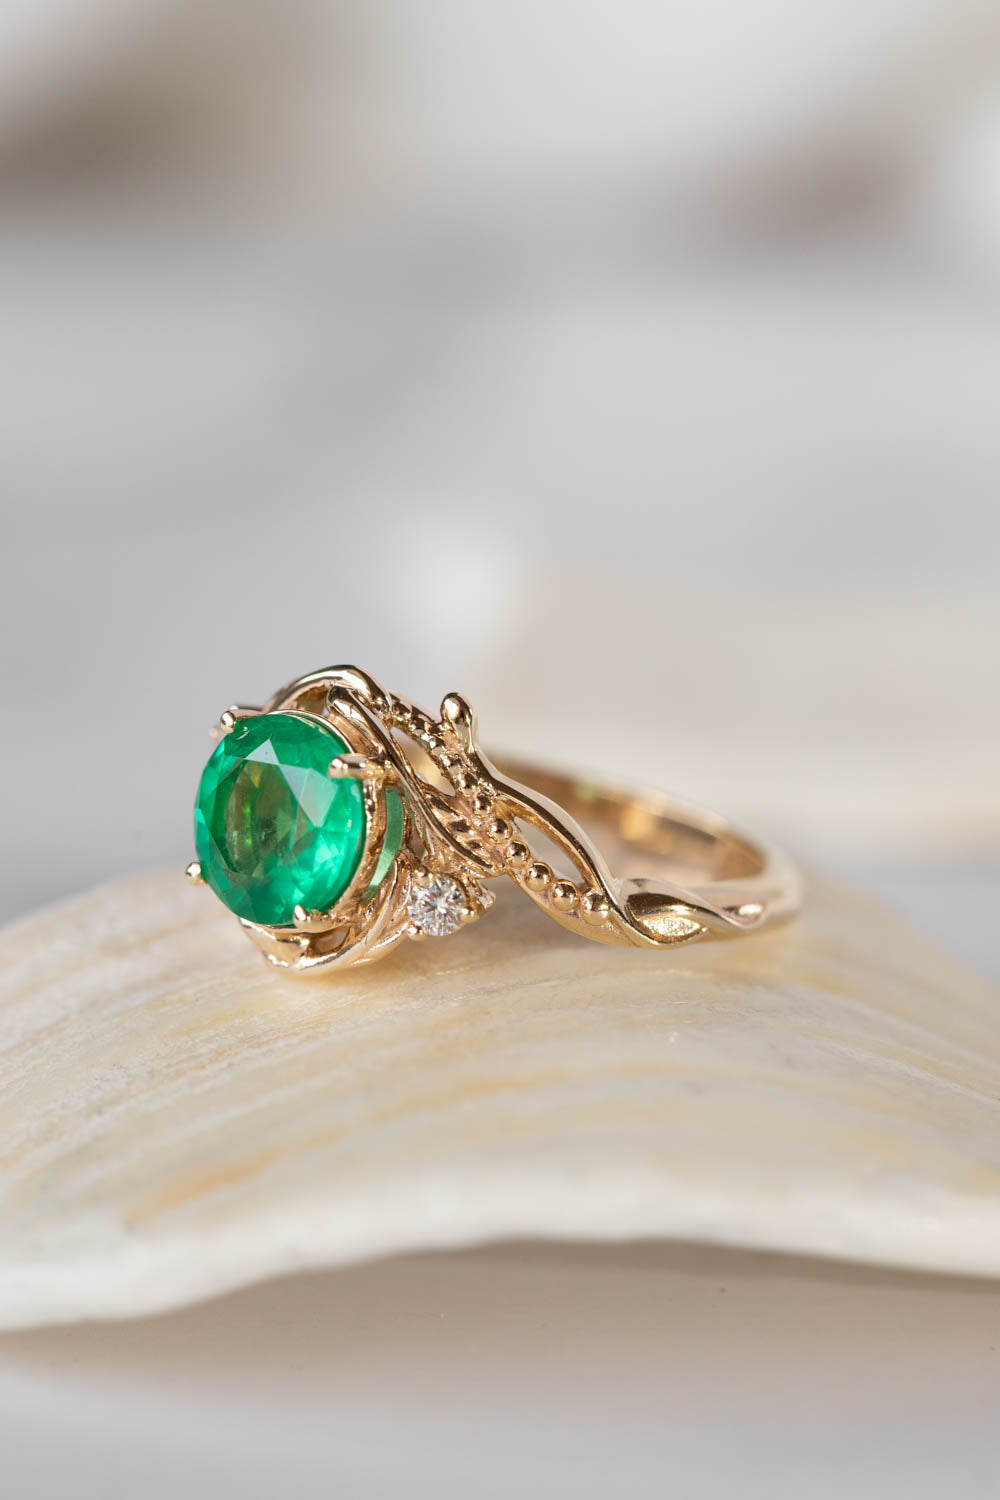 Three Stone Rings and Trilogy Rings for St. Patrick's Day